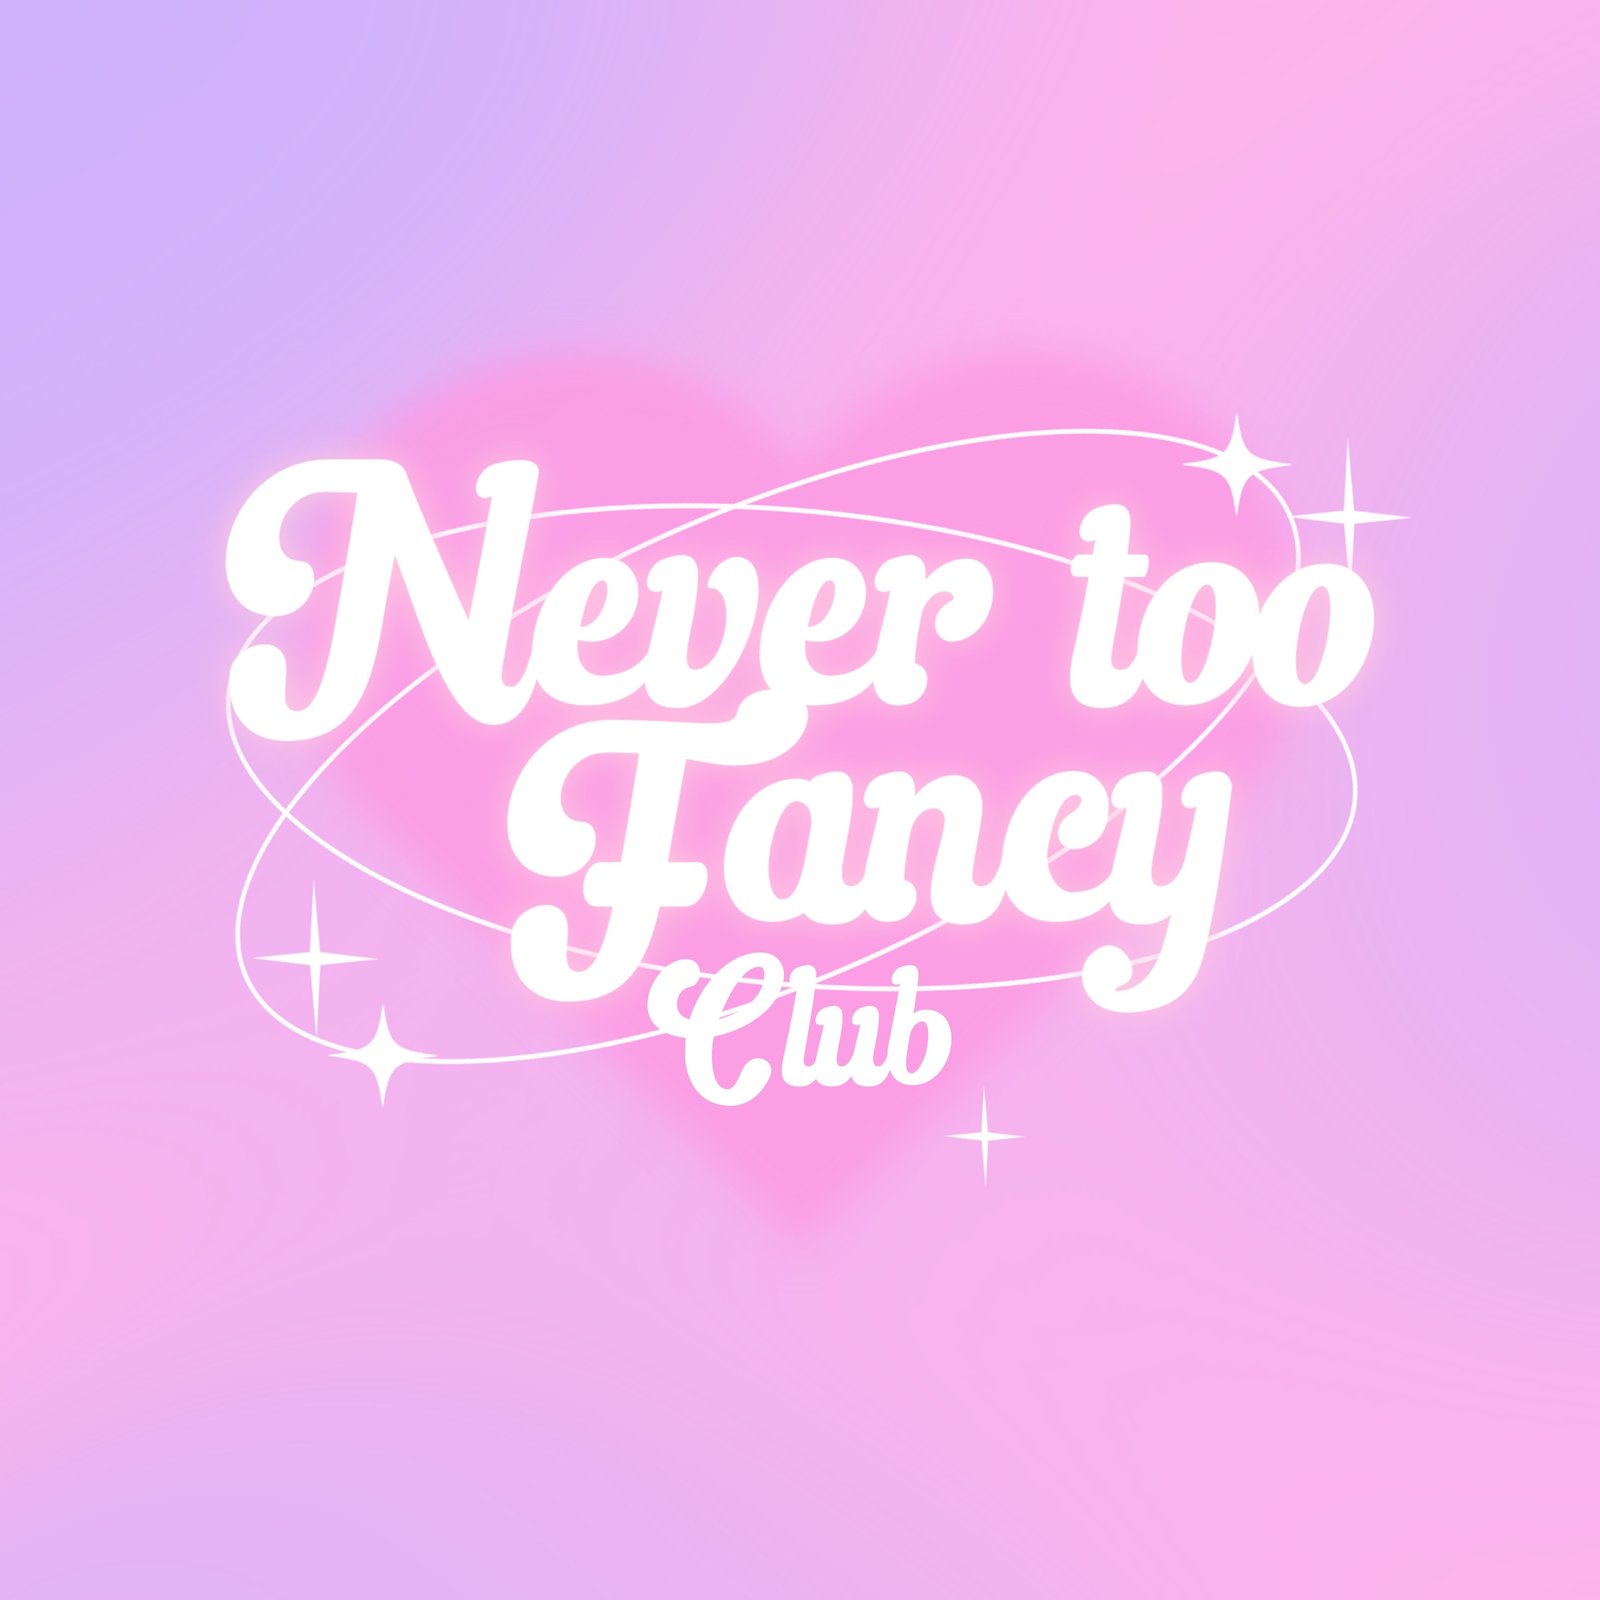 Home | never too fancy club